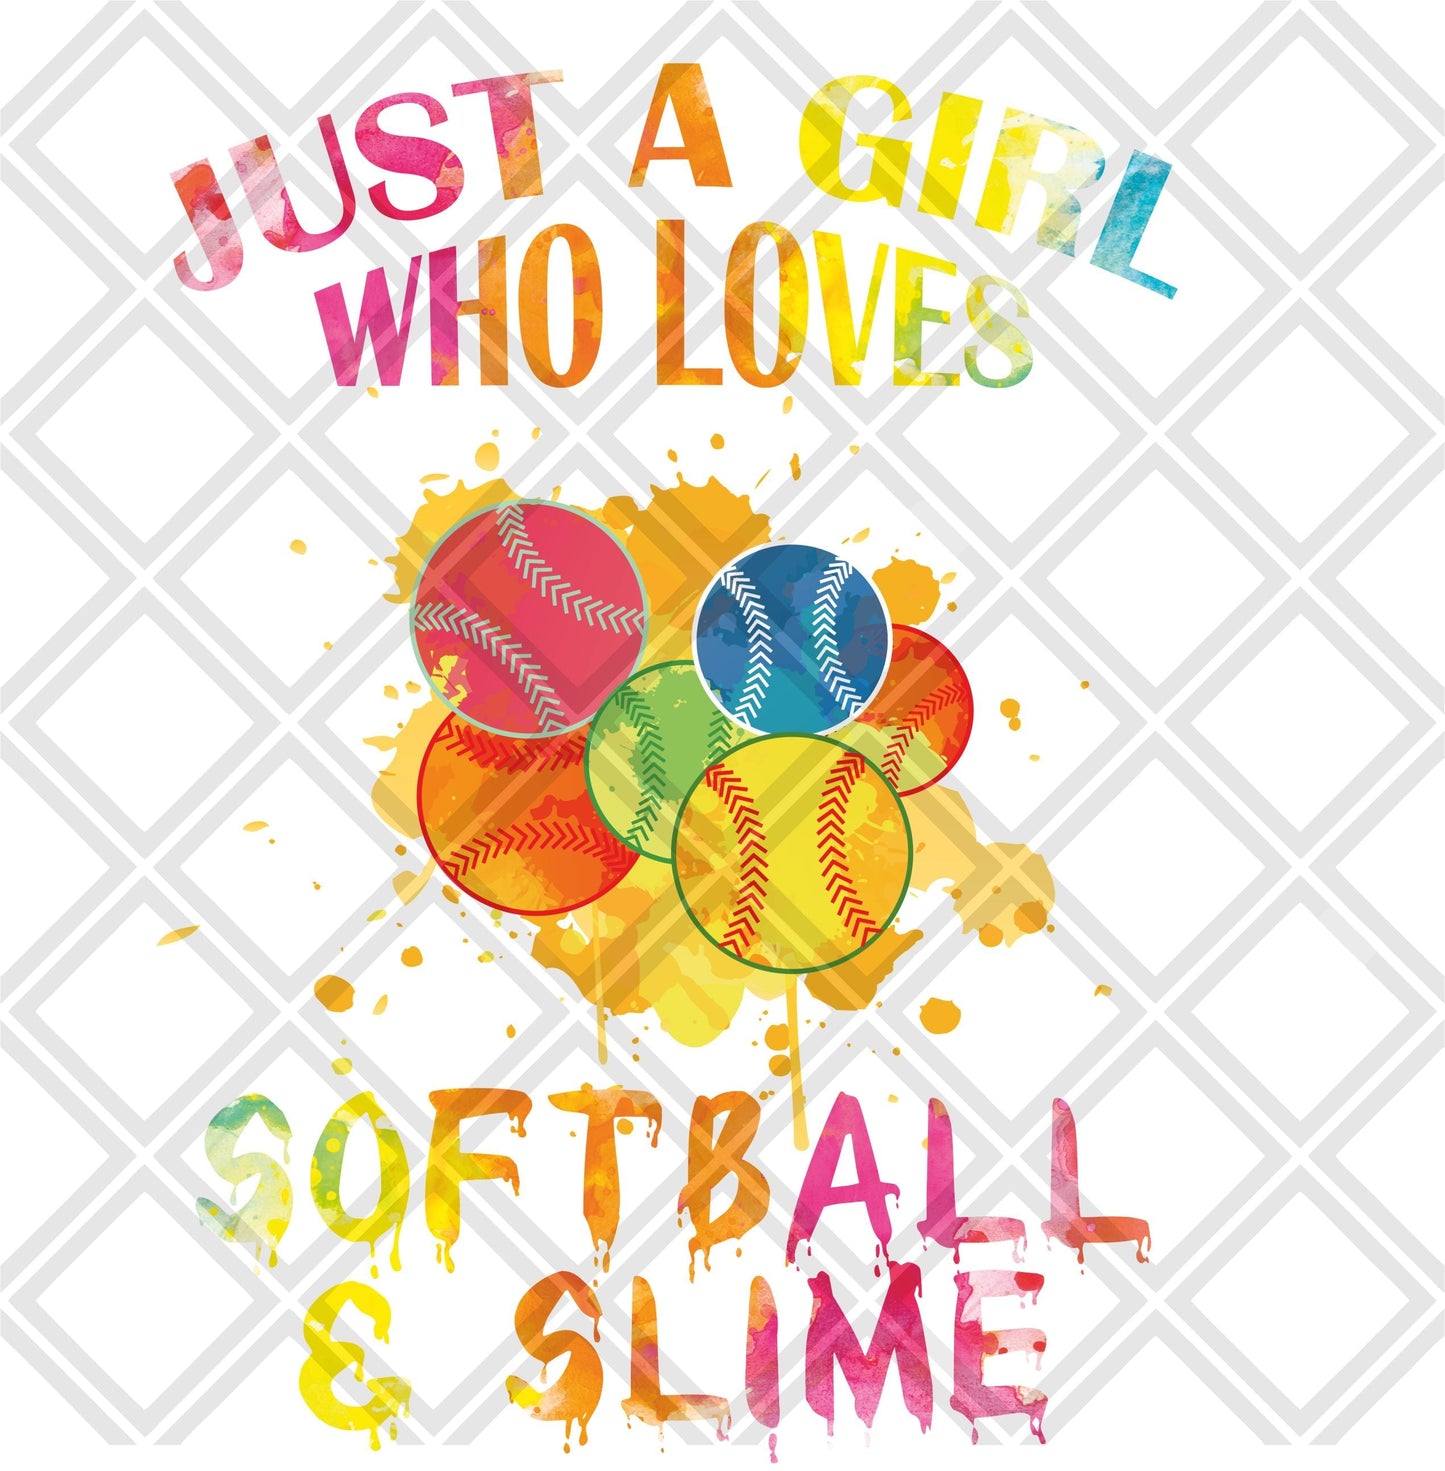 Just a Girl who loves softball and slime DTF TRANSFERPRINT TO ORDER